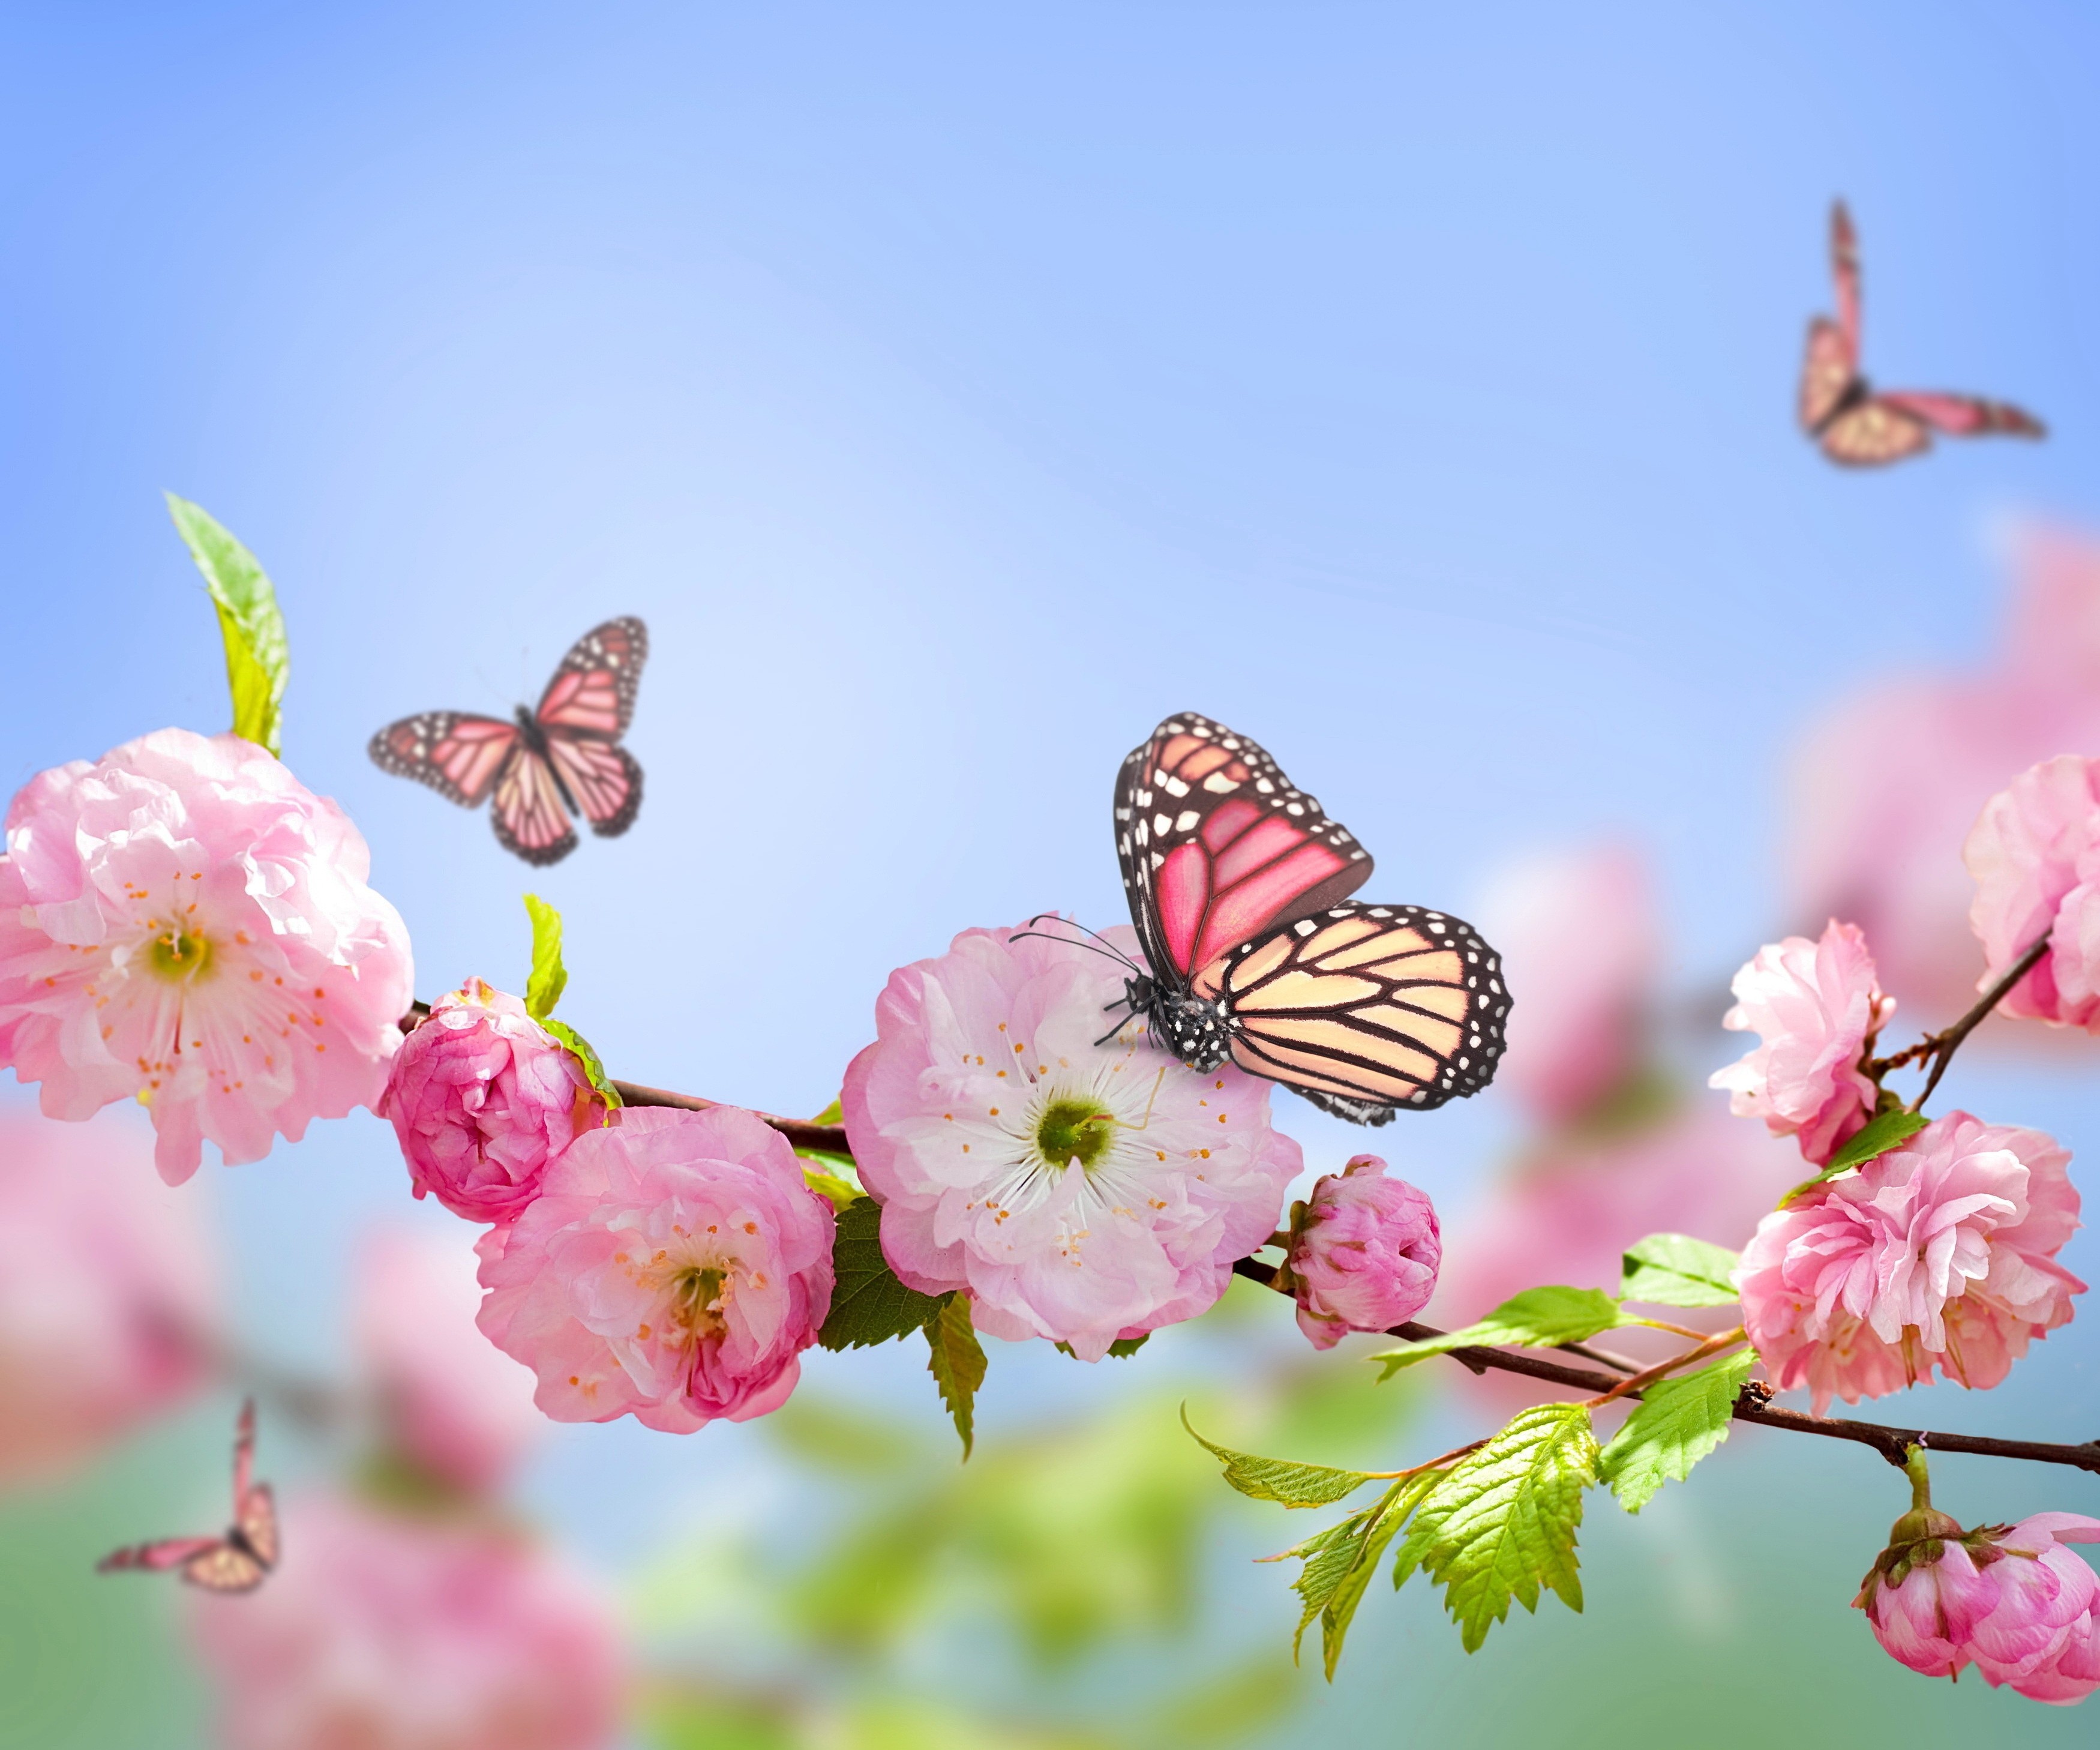 General 3500x2916 butterfly nature flowers pink flowers blossoms animals colorful insect twigs plants